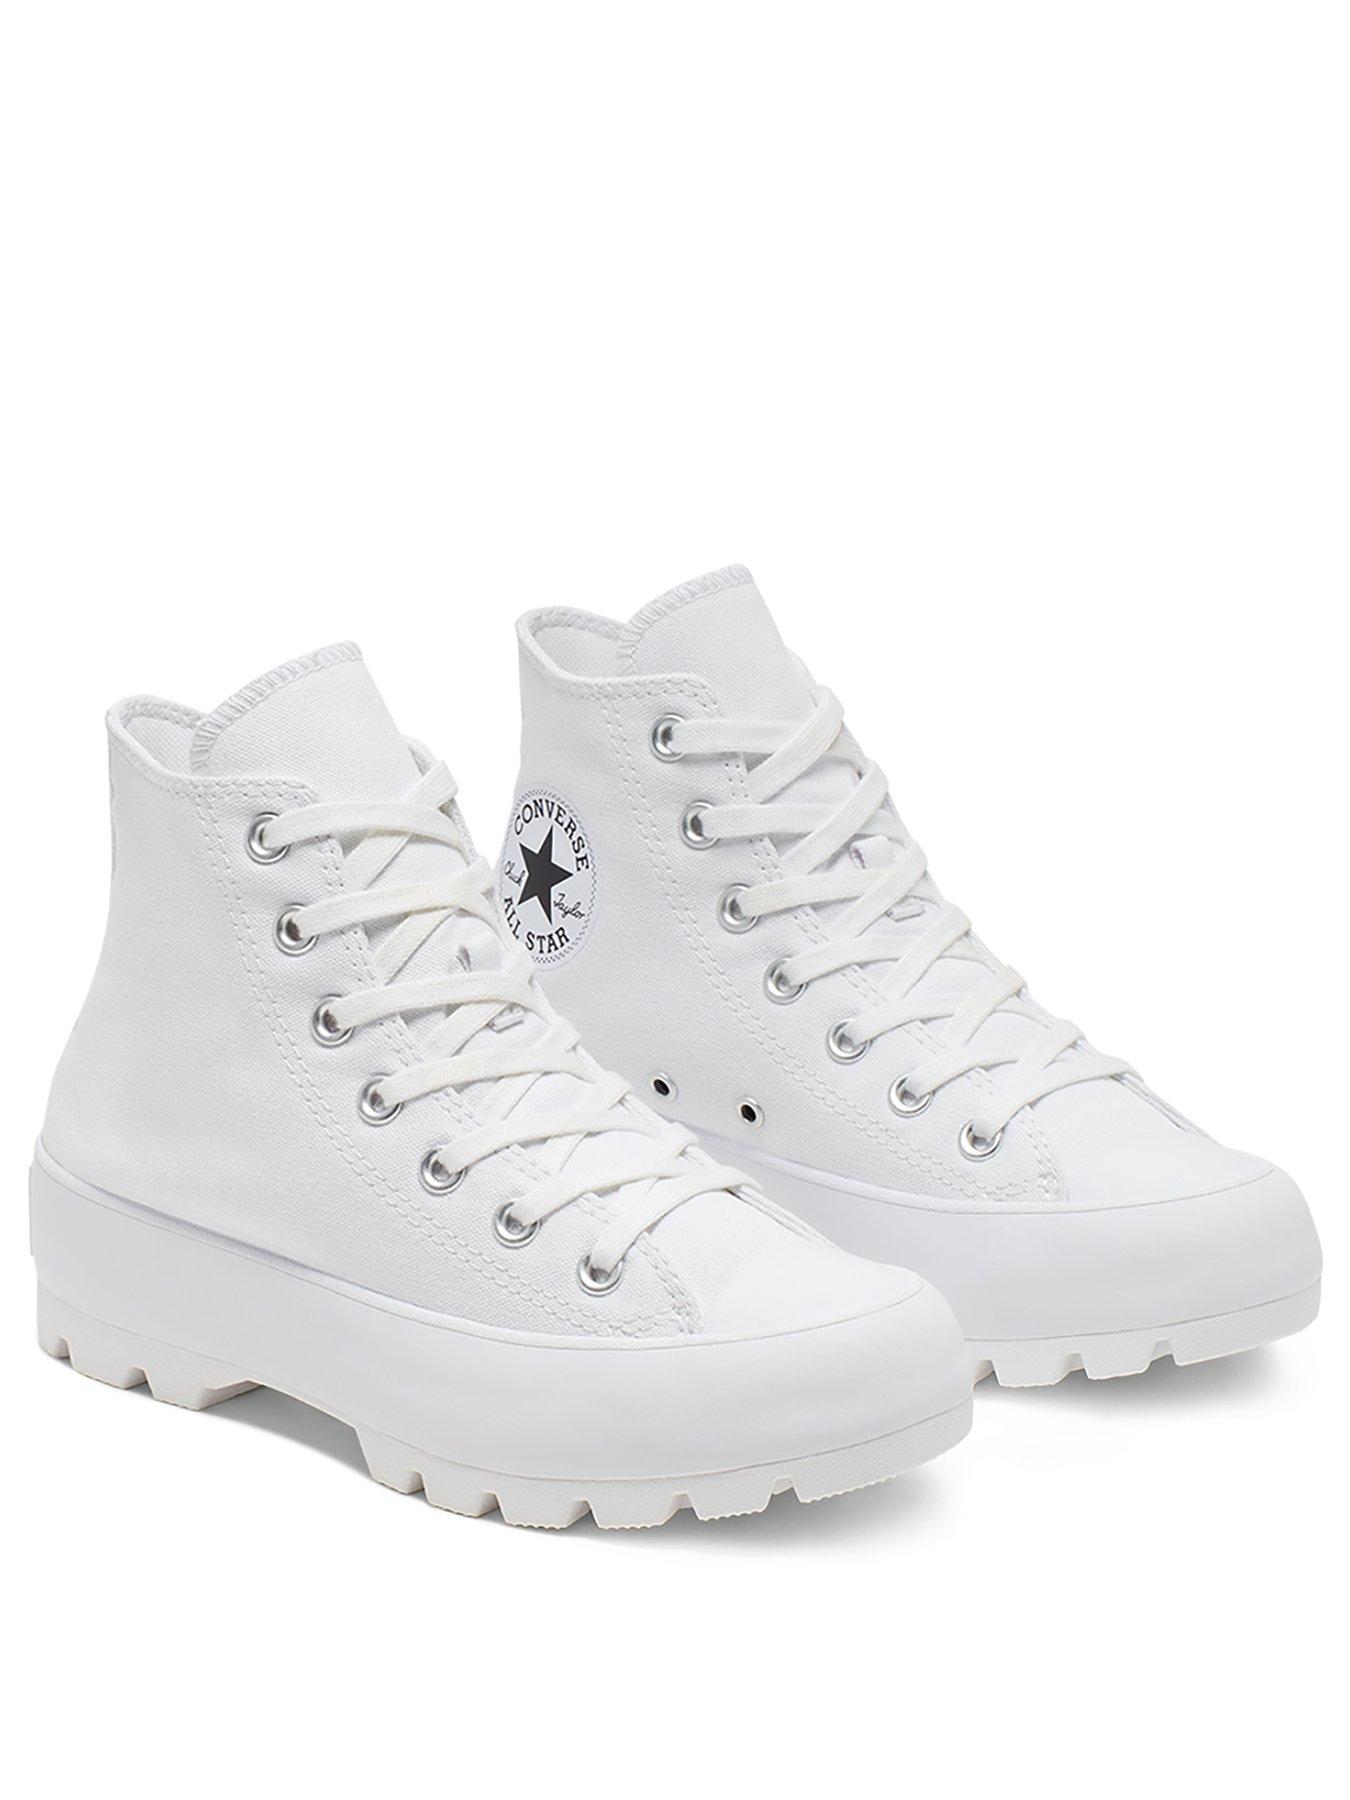 Converse Chuck Taylor All Star Lugged Hi-Tops - White | very.co.uk